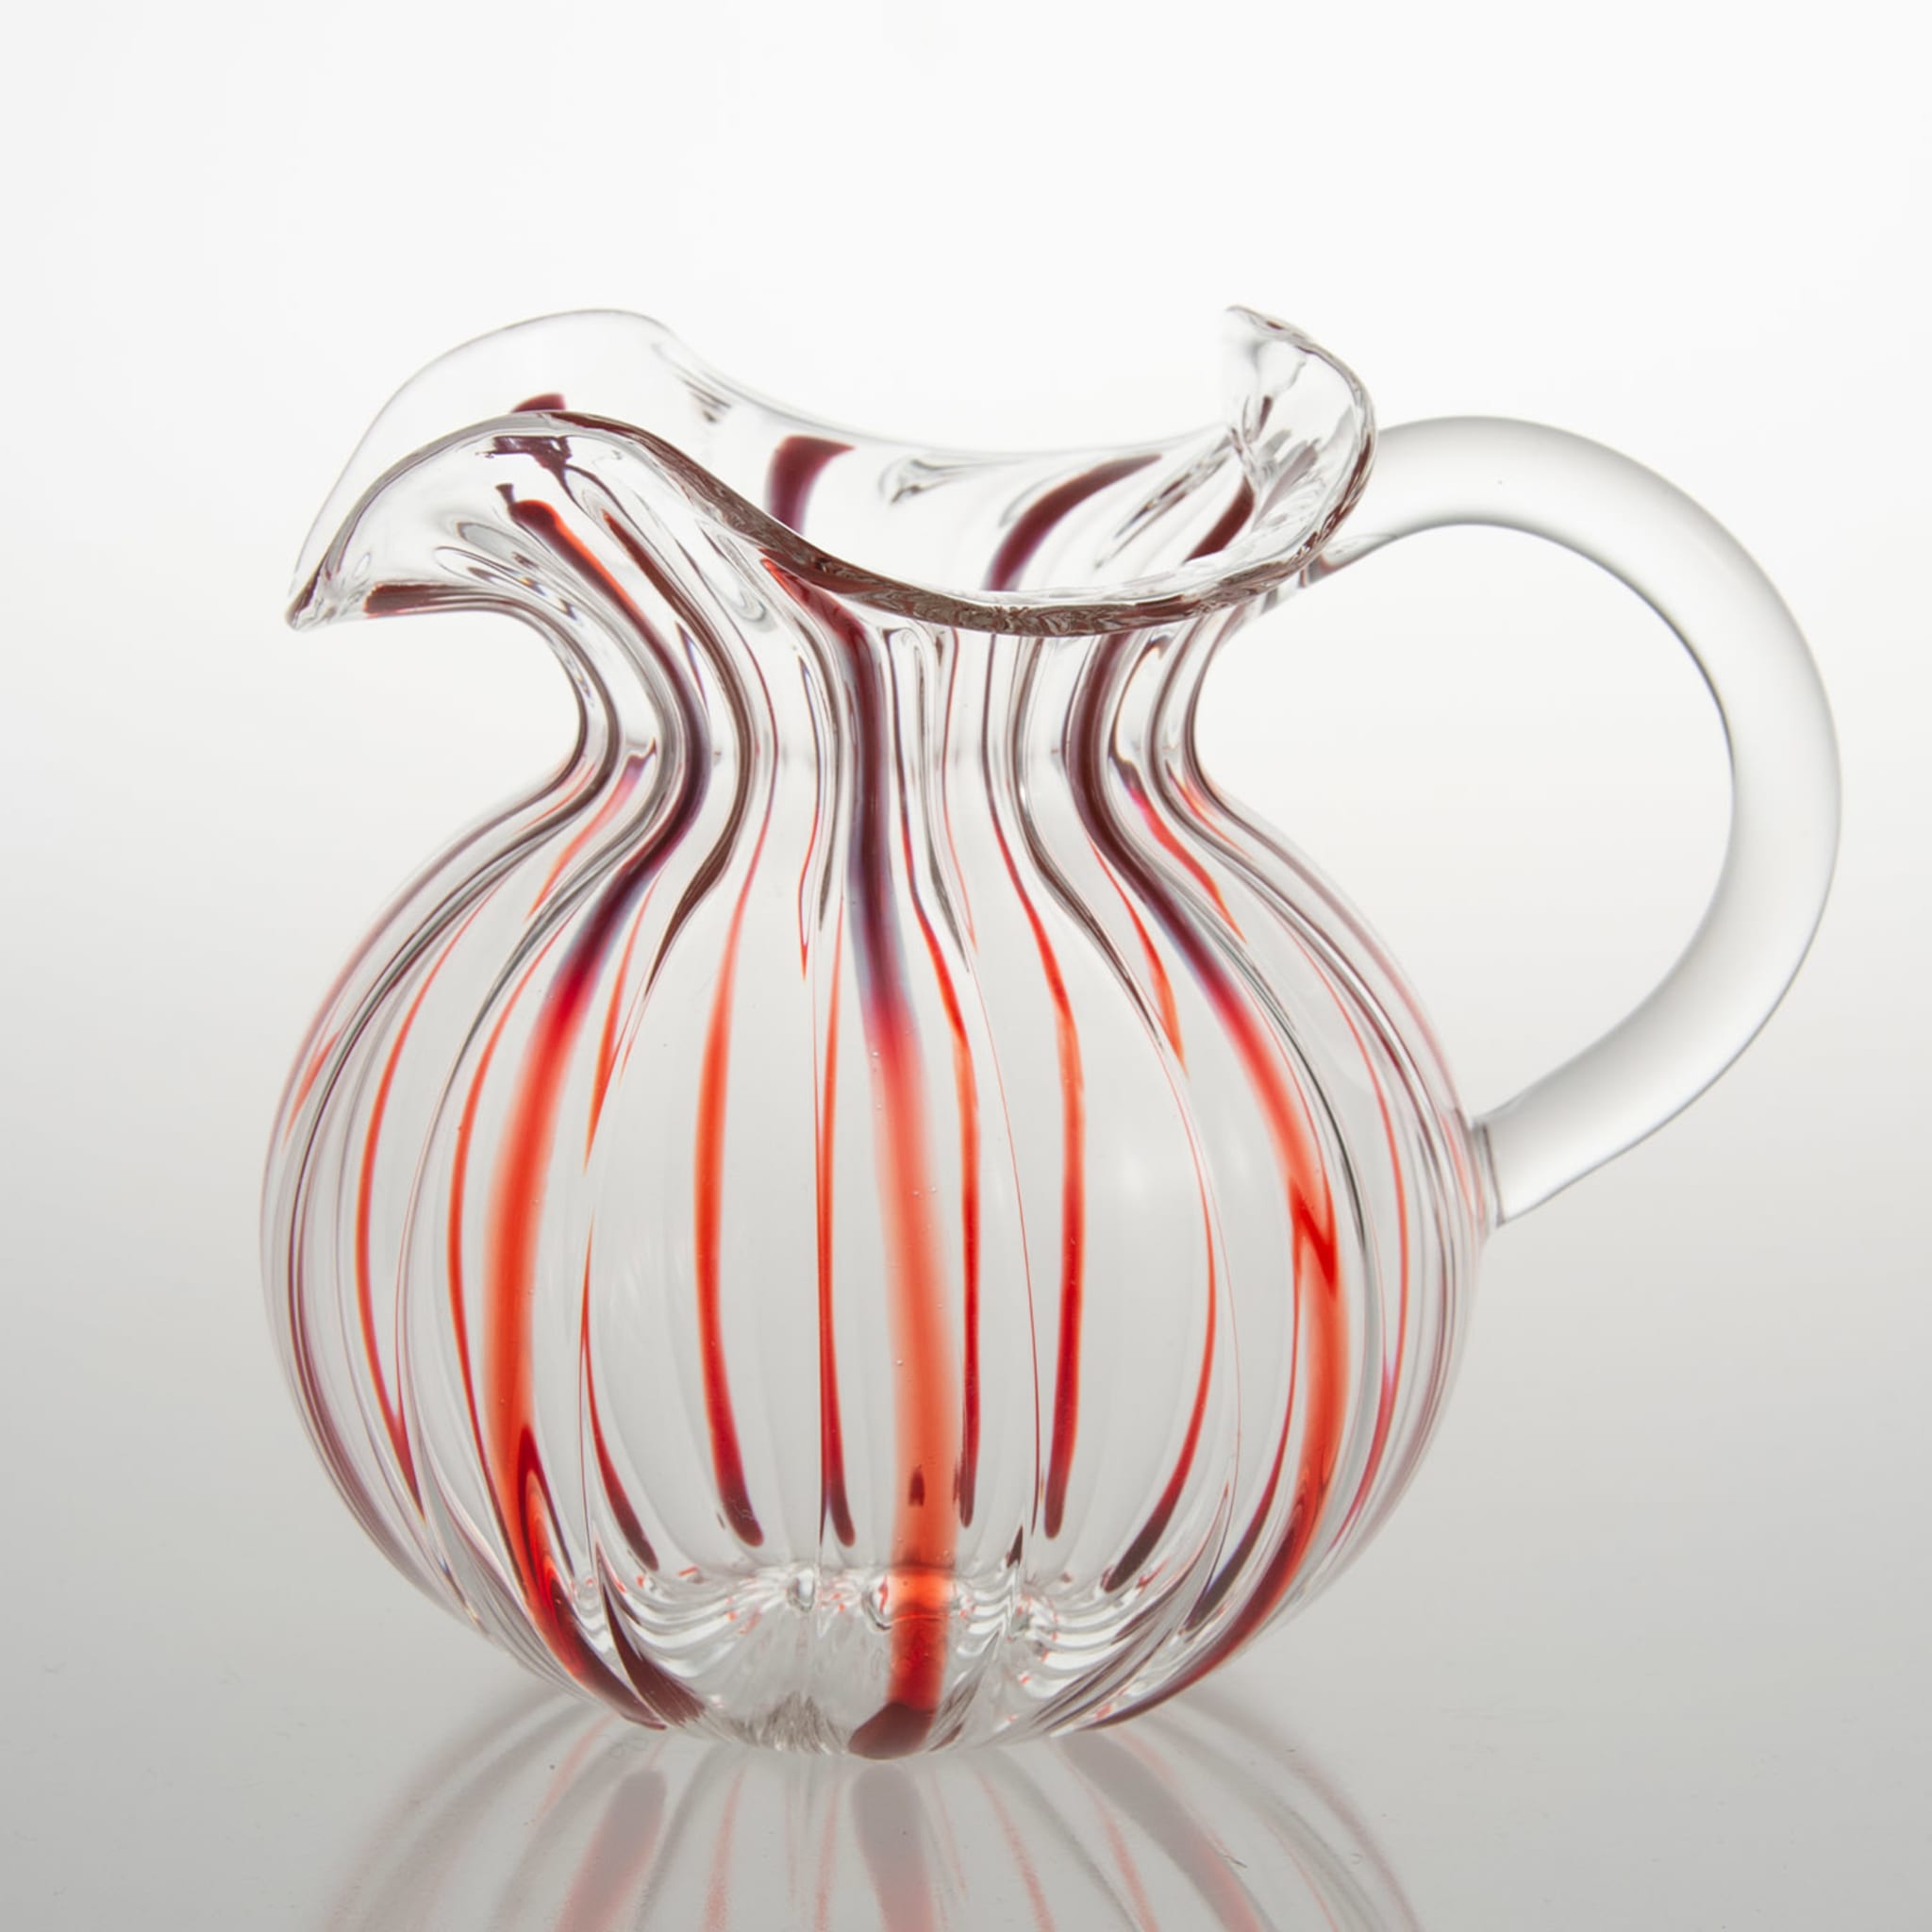 Torcello Red Striped Pitcher - Alternative view 1